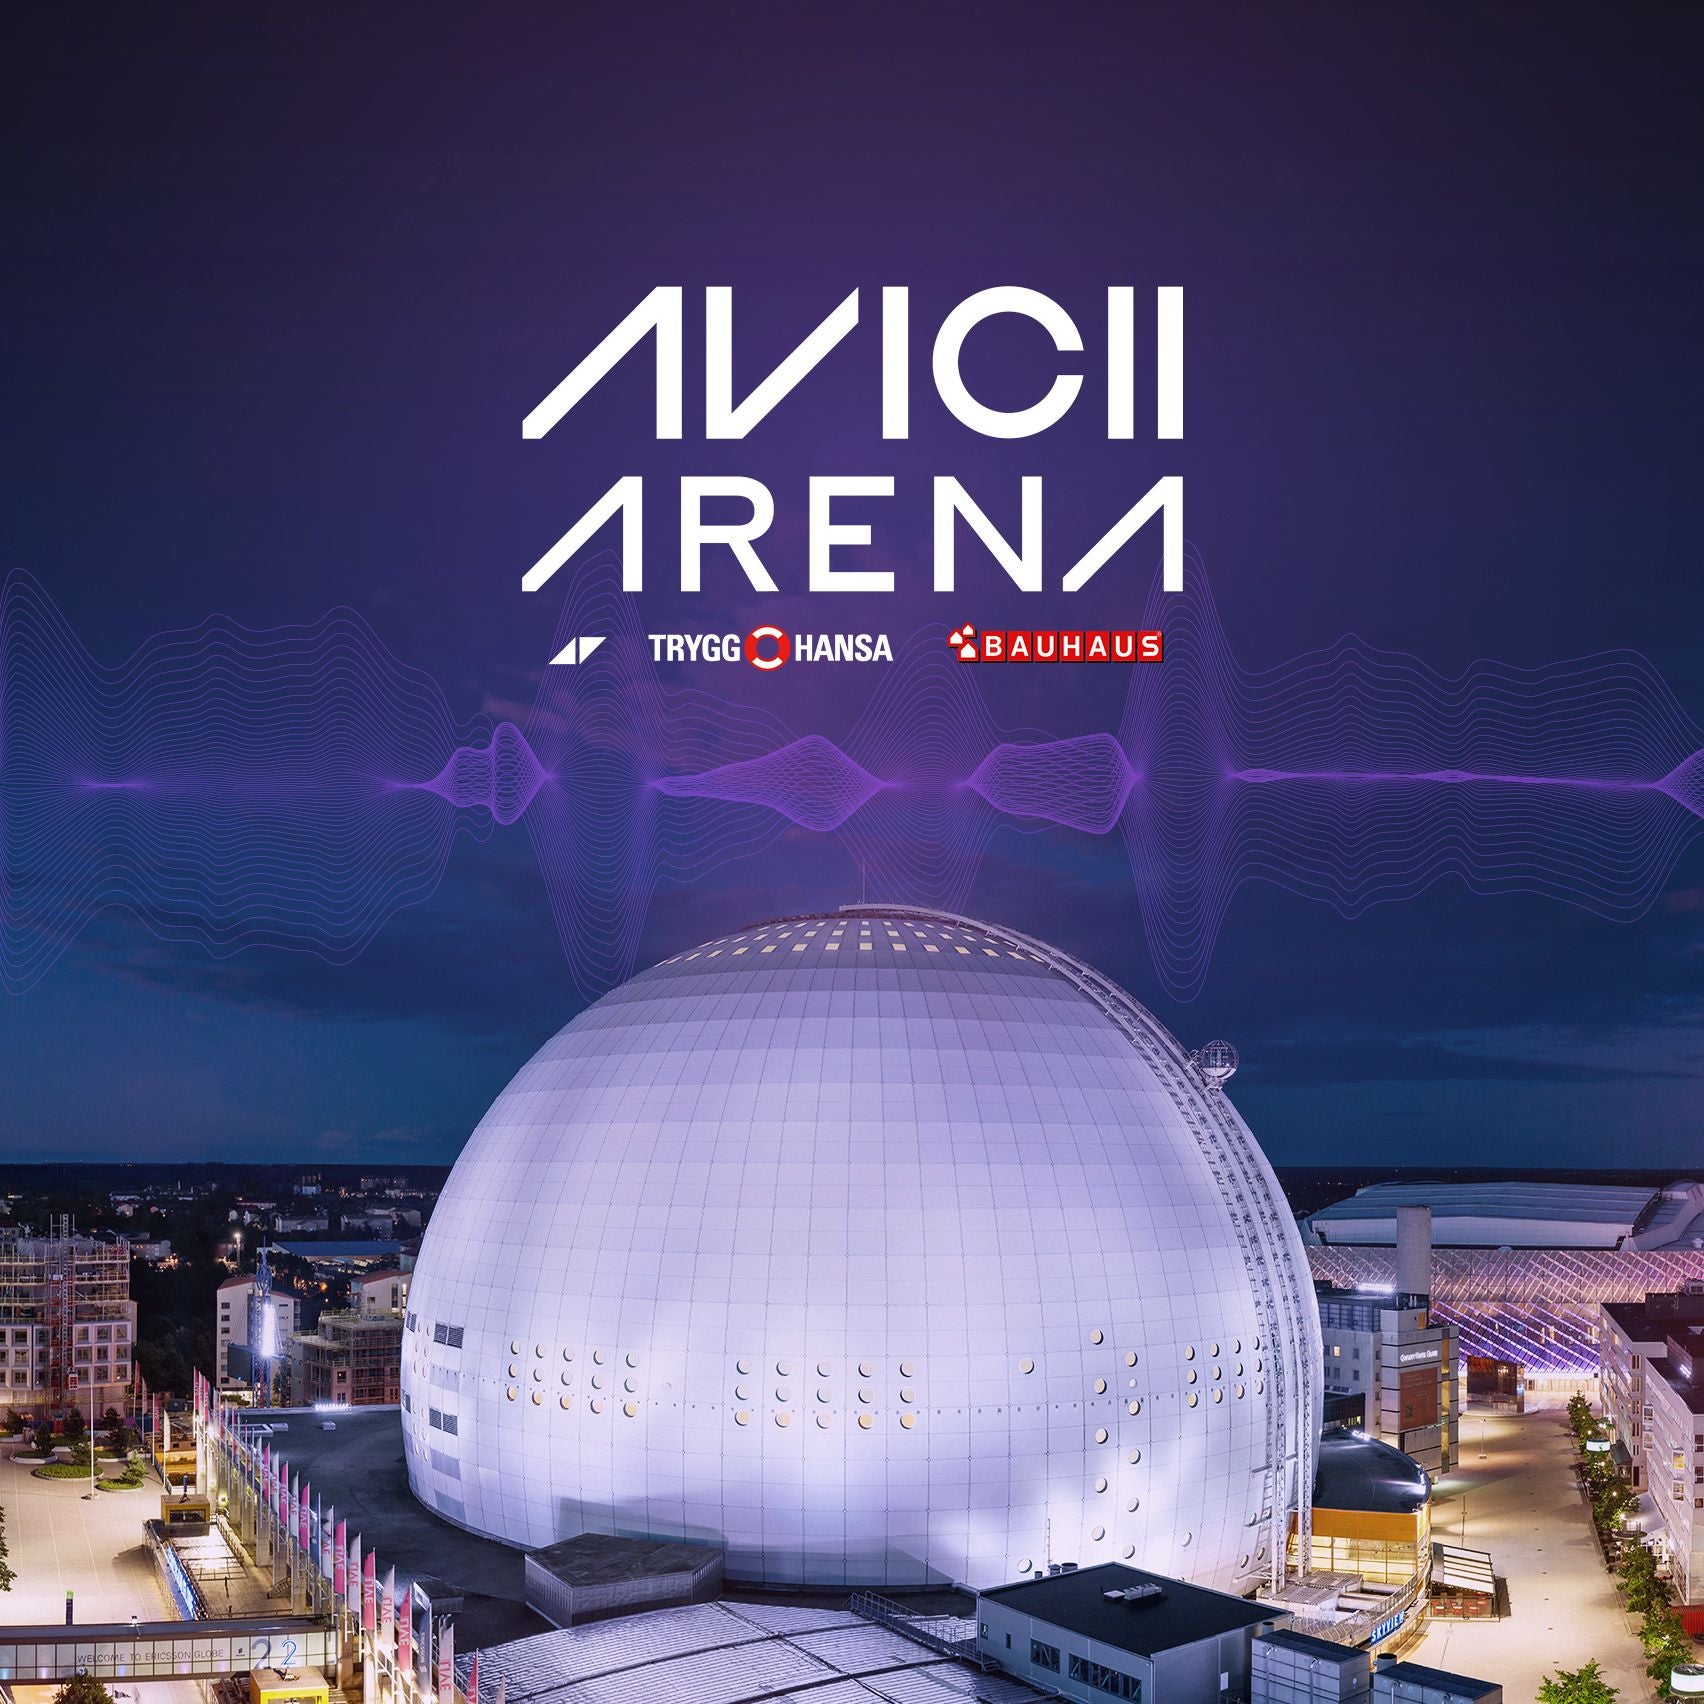 More Info for One of world's most iconic venues, the Ericsson Globe, is now Avicii Arena.